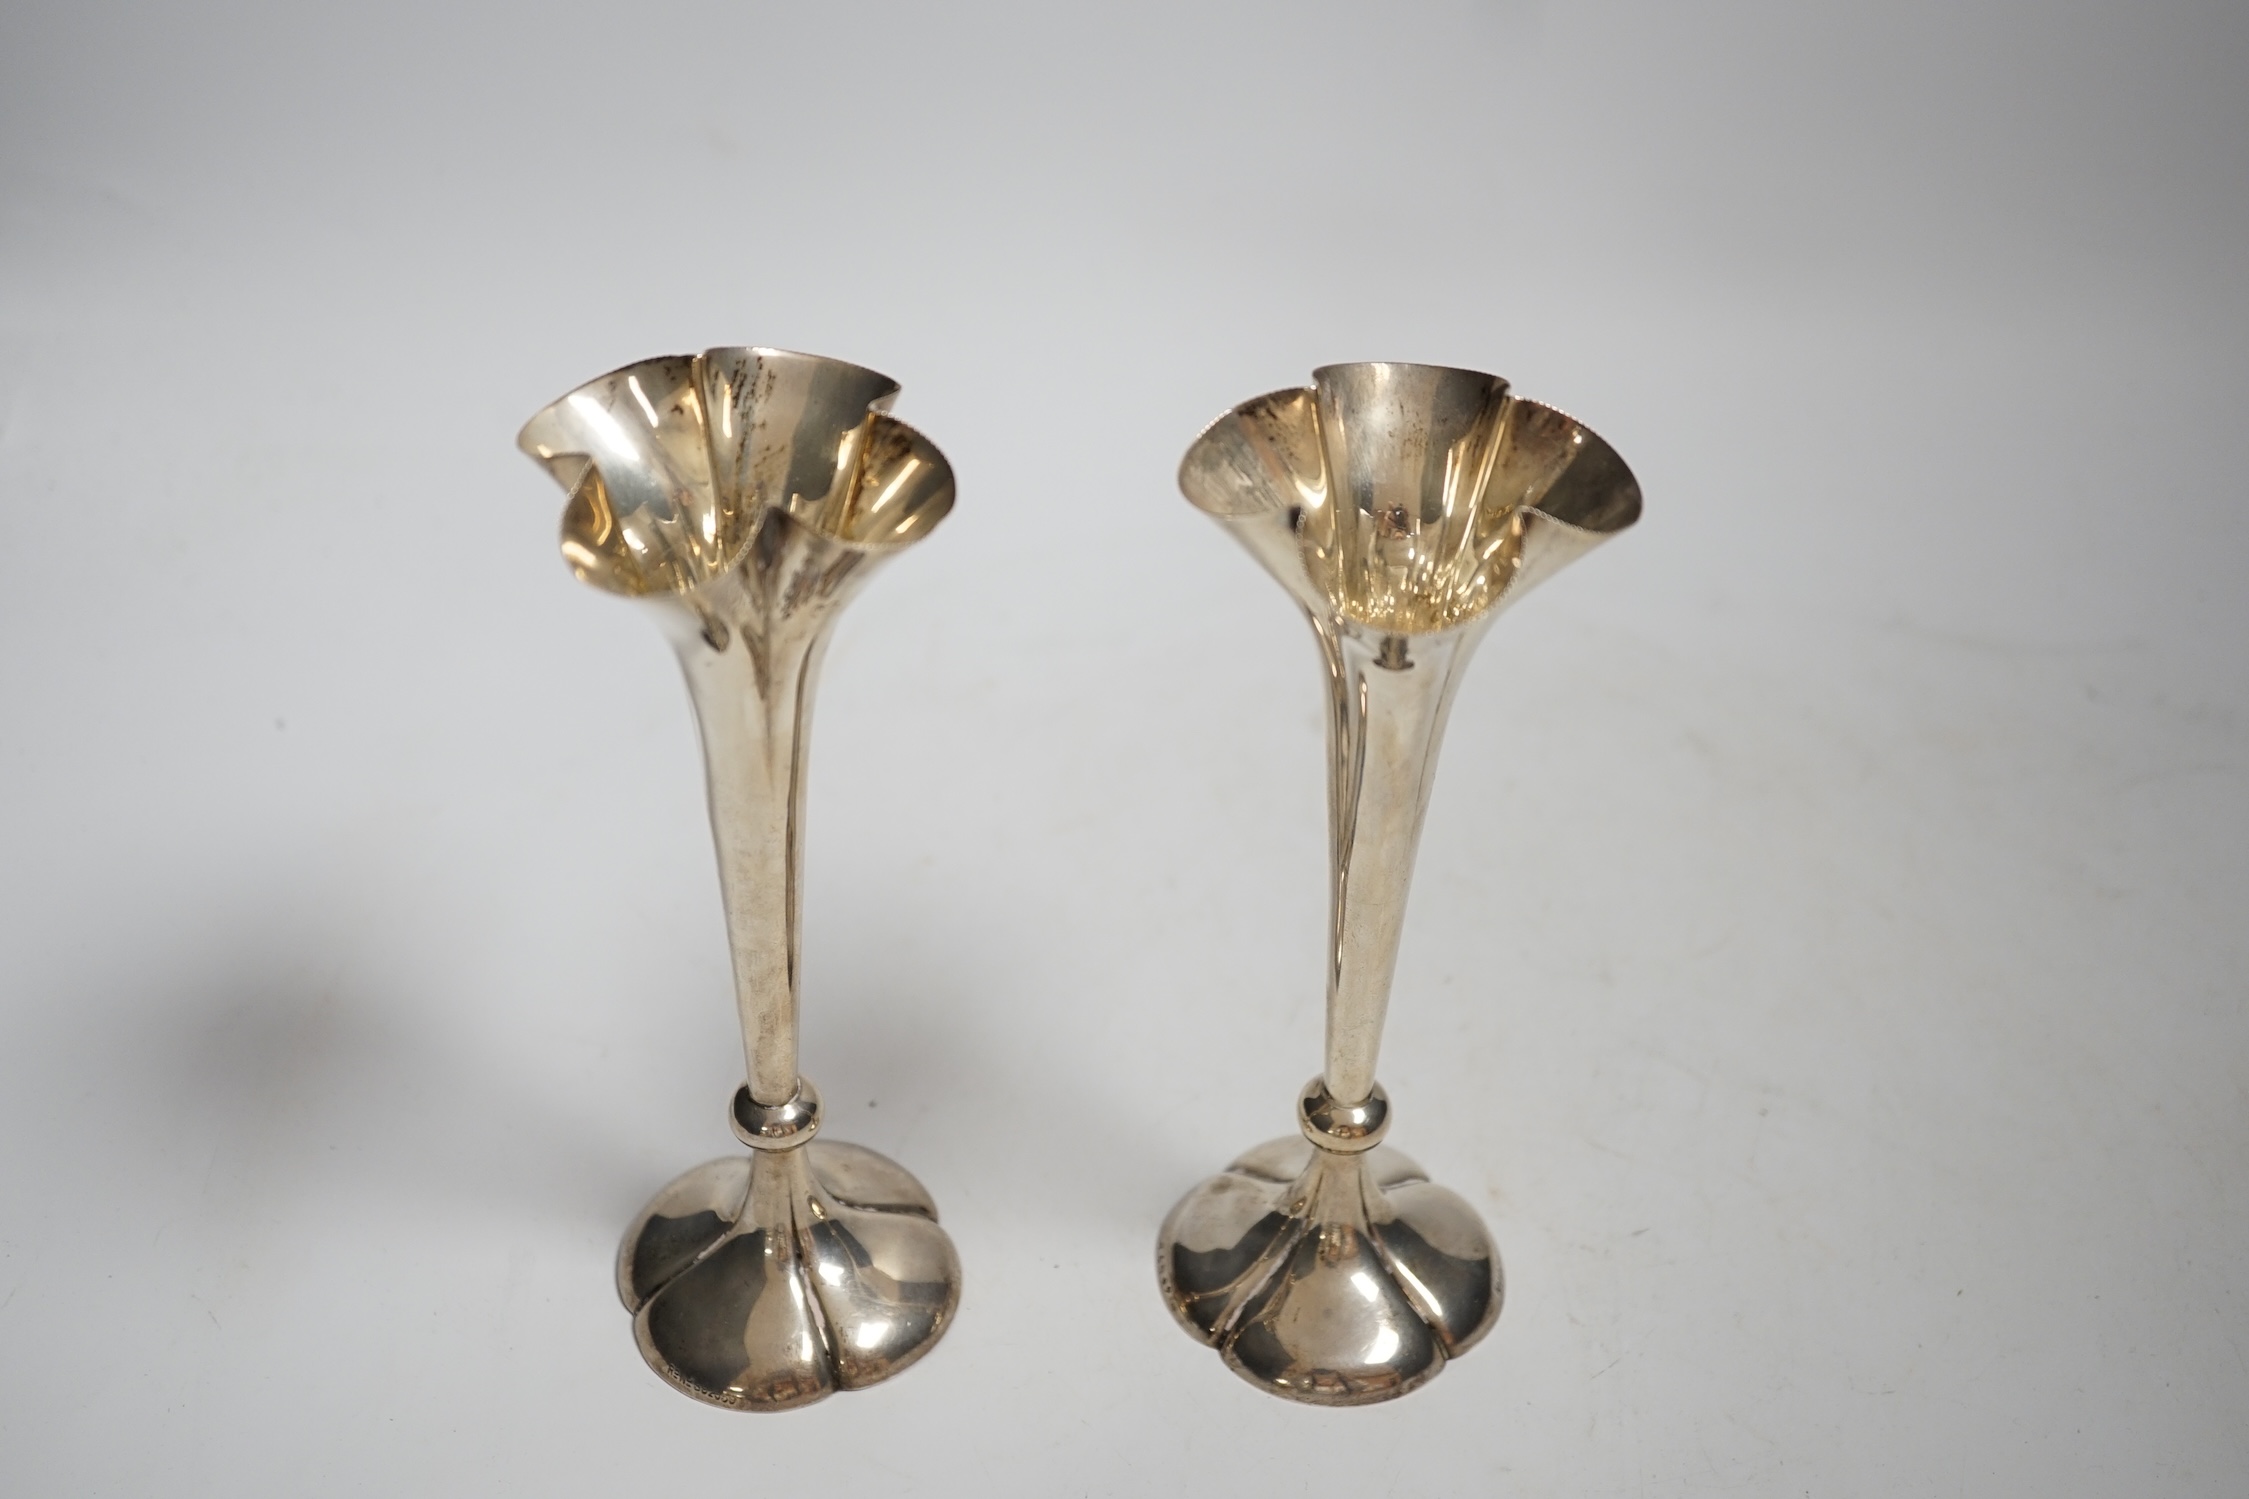 A pair of Edwardian silver posy vases, London, 1906, 16.8cm, weighted.